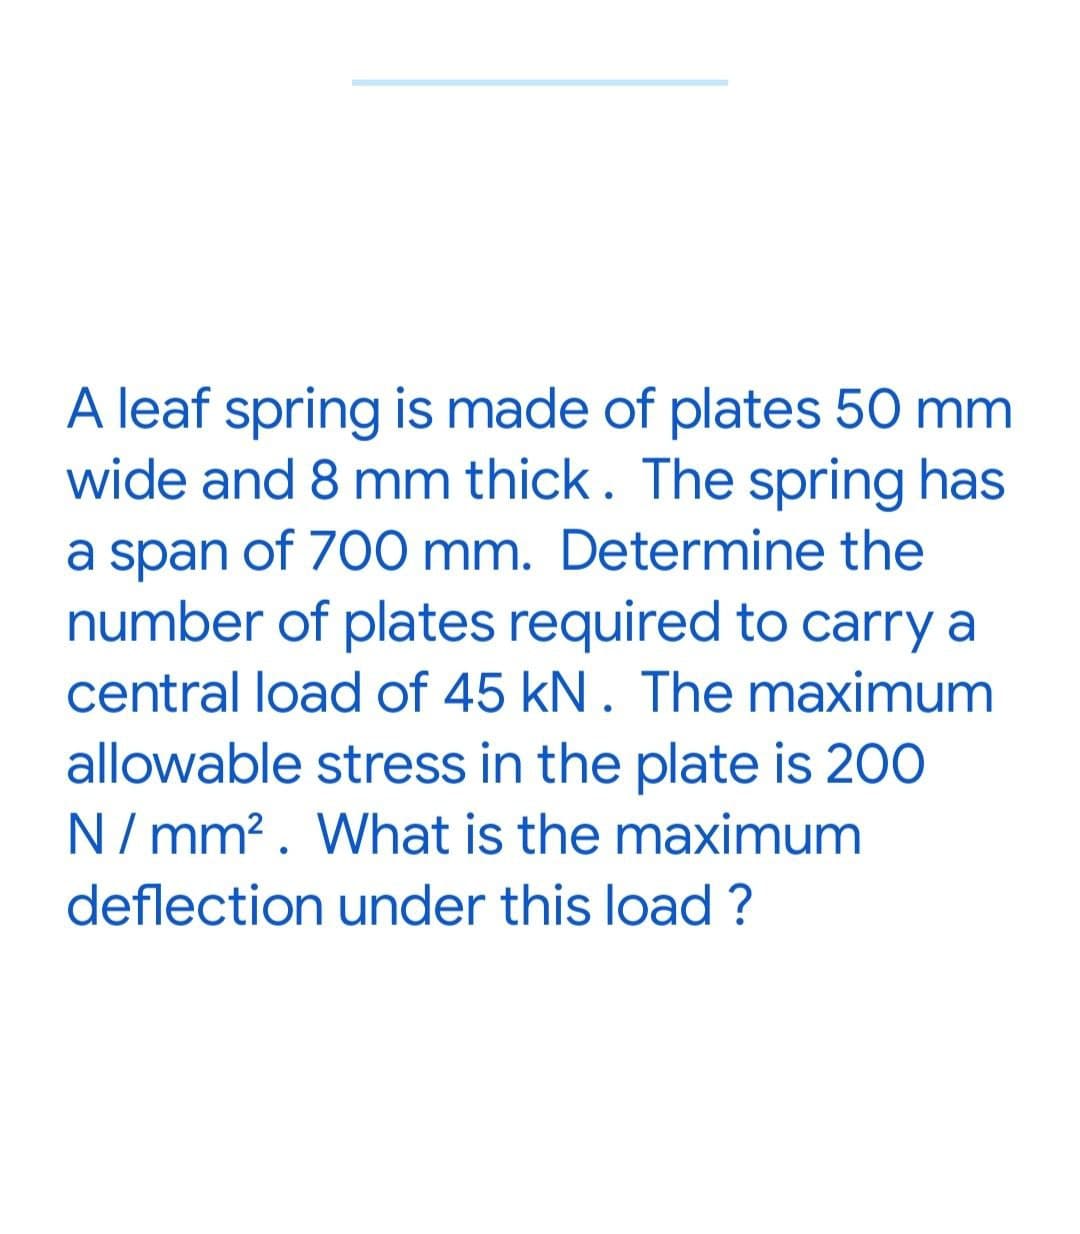 A leaf spring is made of plates 50 mm
wide and 8 mm thick. The spring has
a span of 700 mm. Determine the
number of plates required to carry a
central load of 45 kN. The maximum
allowable stress in the plate is 200
N/mm². What is the maximum
deflection under this load?